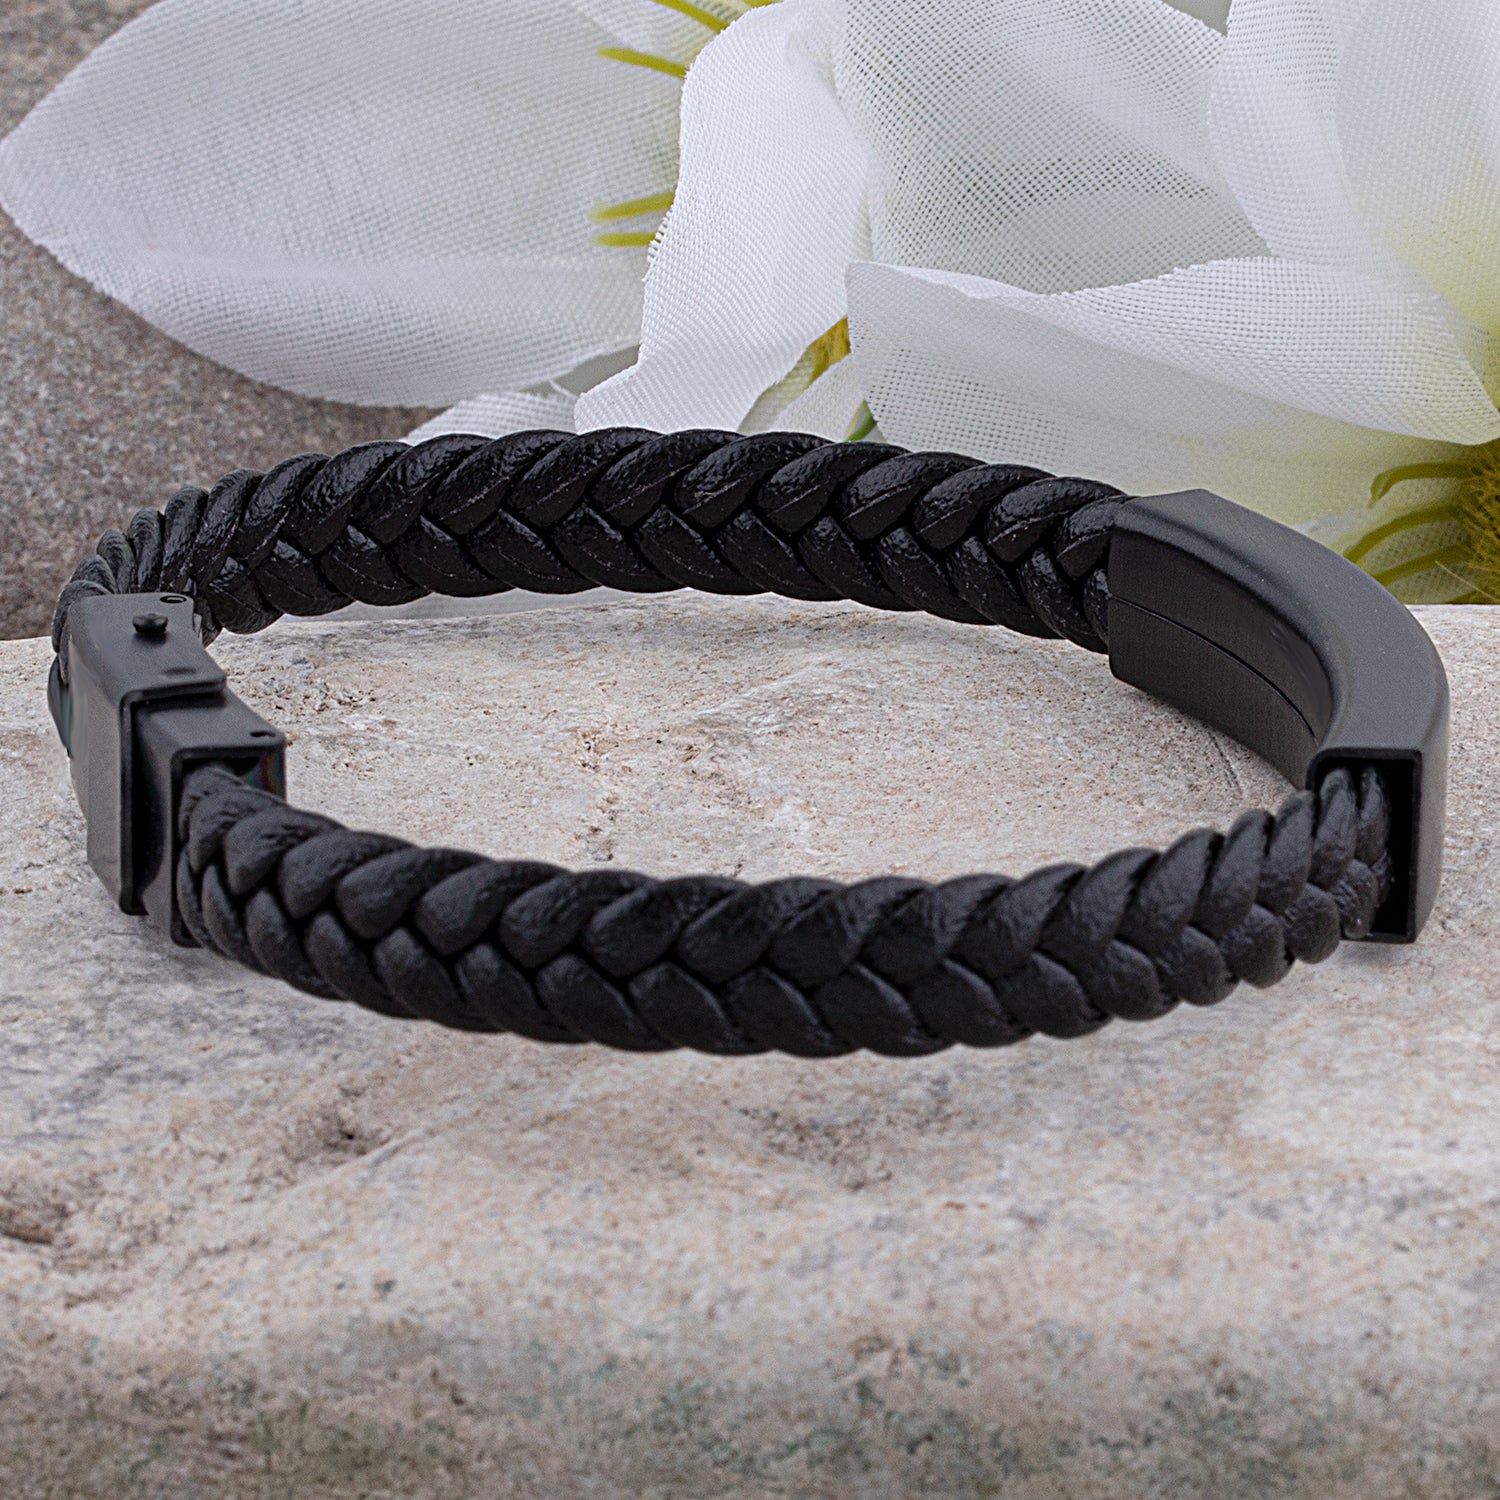 Men's Stainless Steel Black Leather Bracelet with Engraving Plate - SSLB005